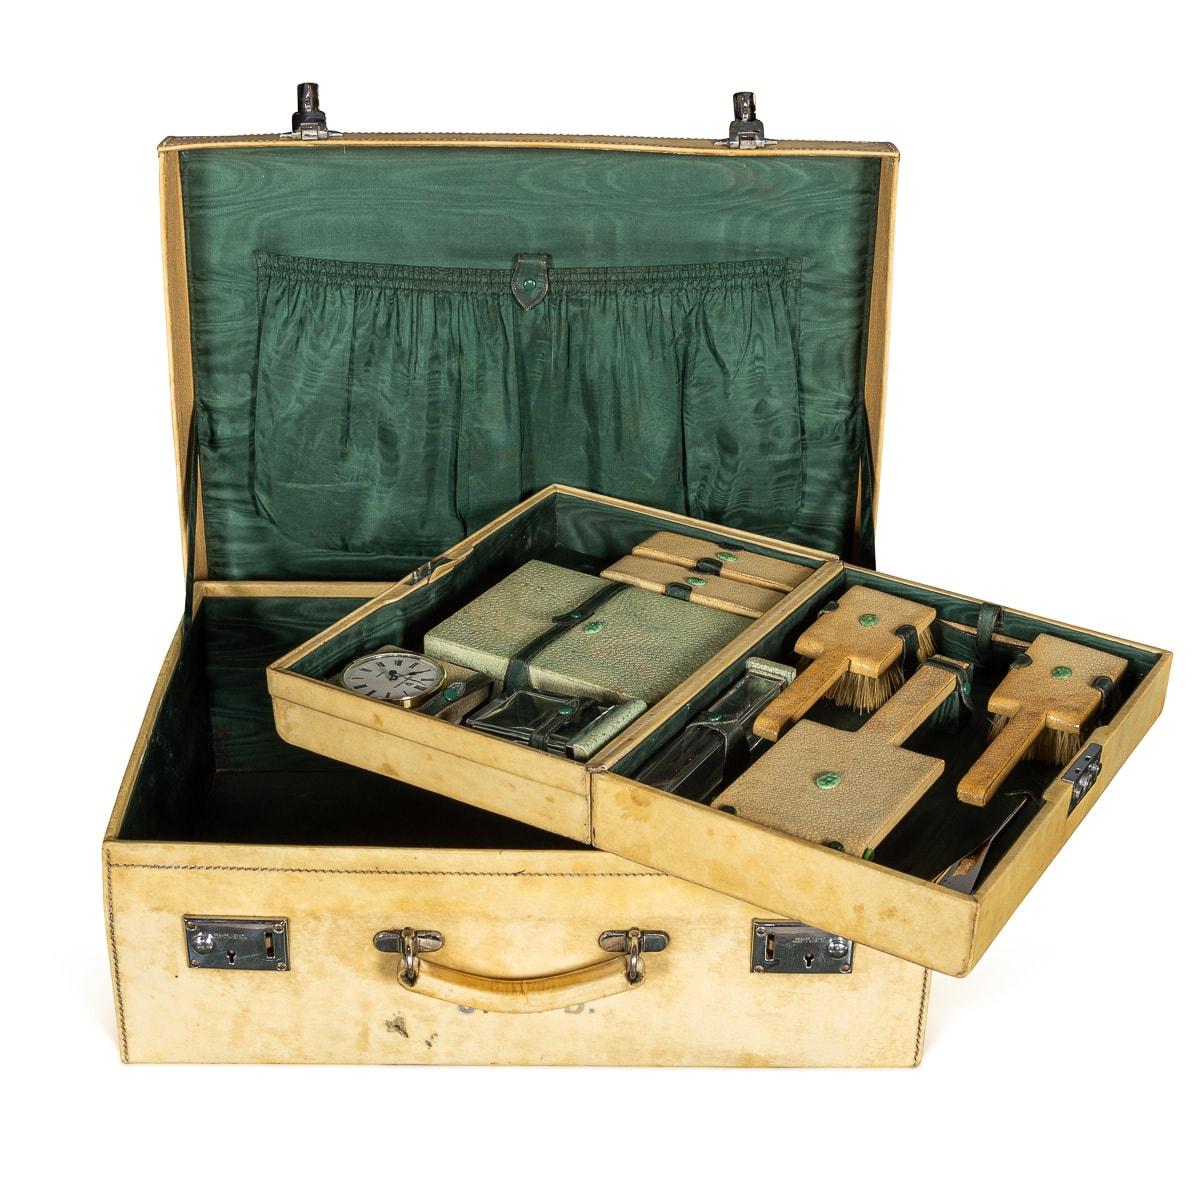 Antique 20th-century English suitcase crafted from luxurious vellum, accompanied by a compact interior vanity case, offers versatility for both joint and individual use. Adorned with a decadent touch, both cases are elegantly lined with a sumptuous